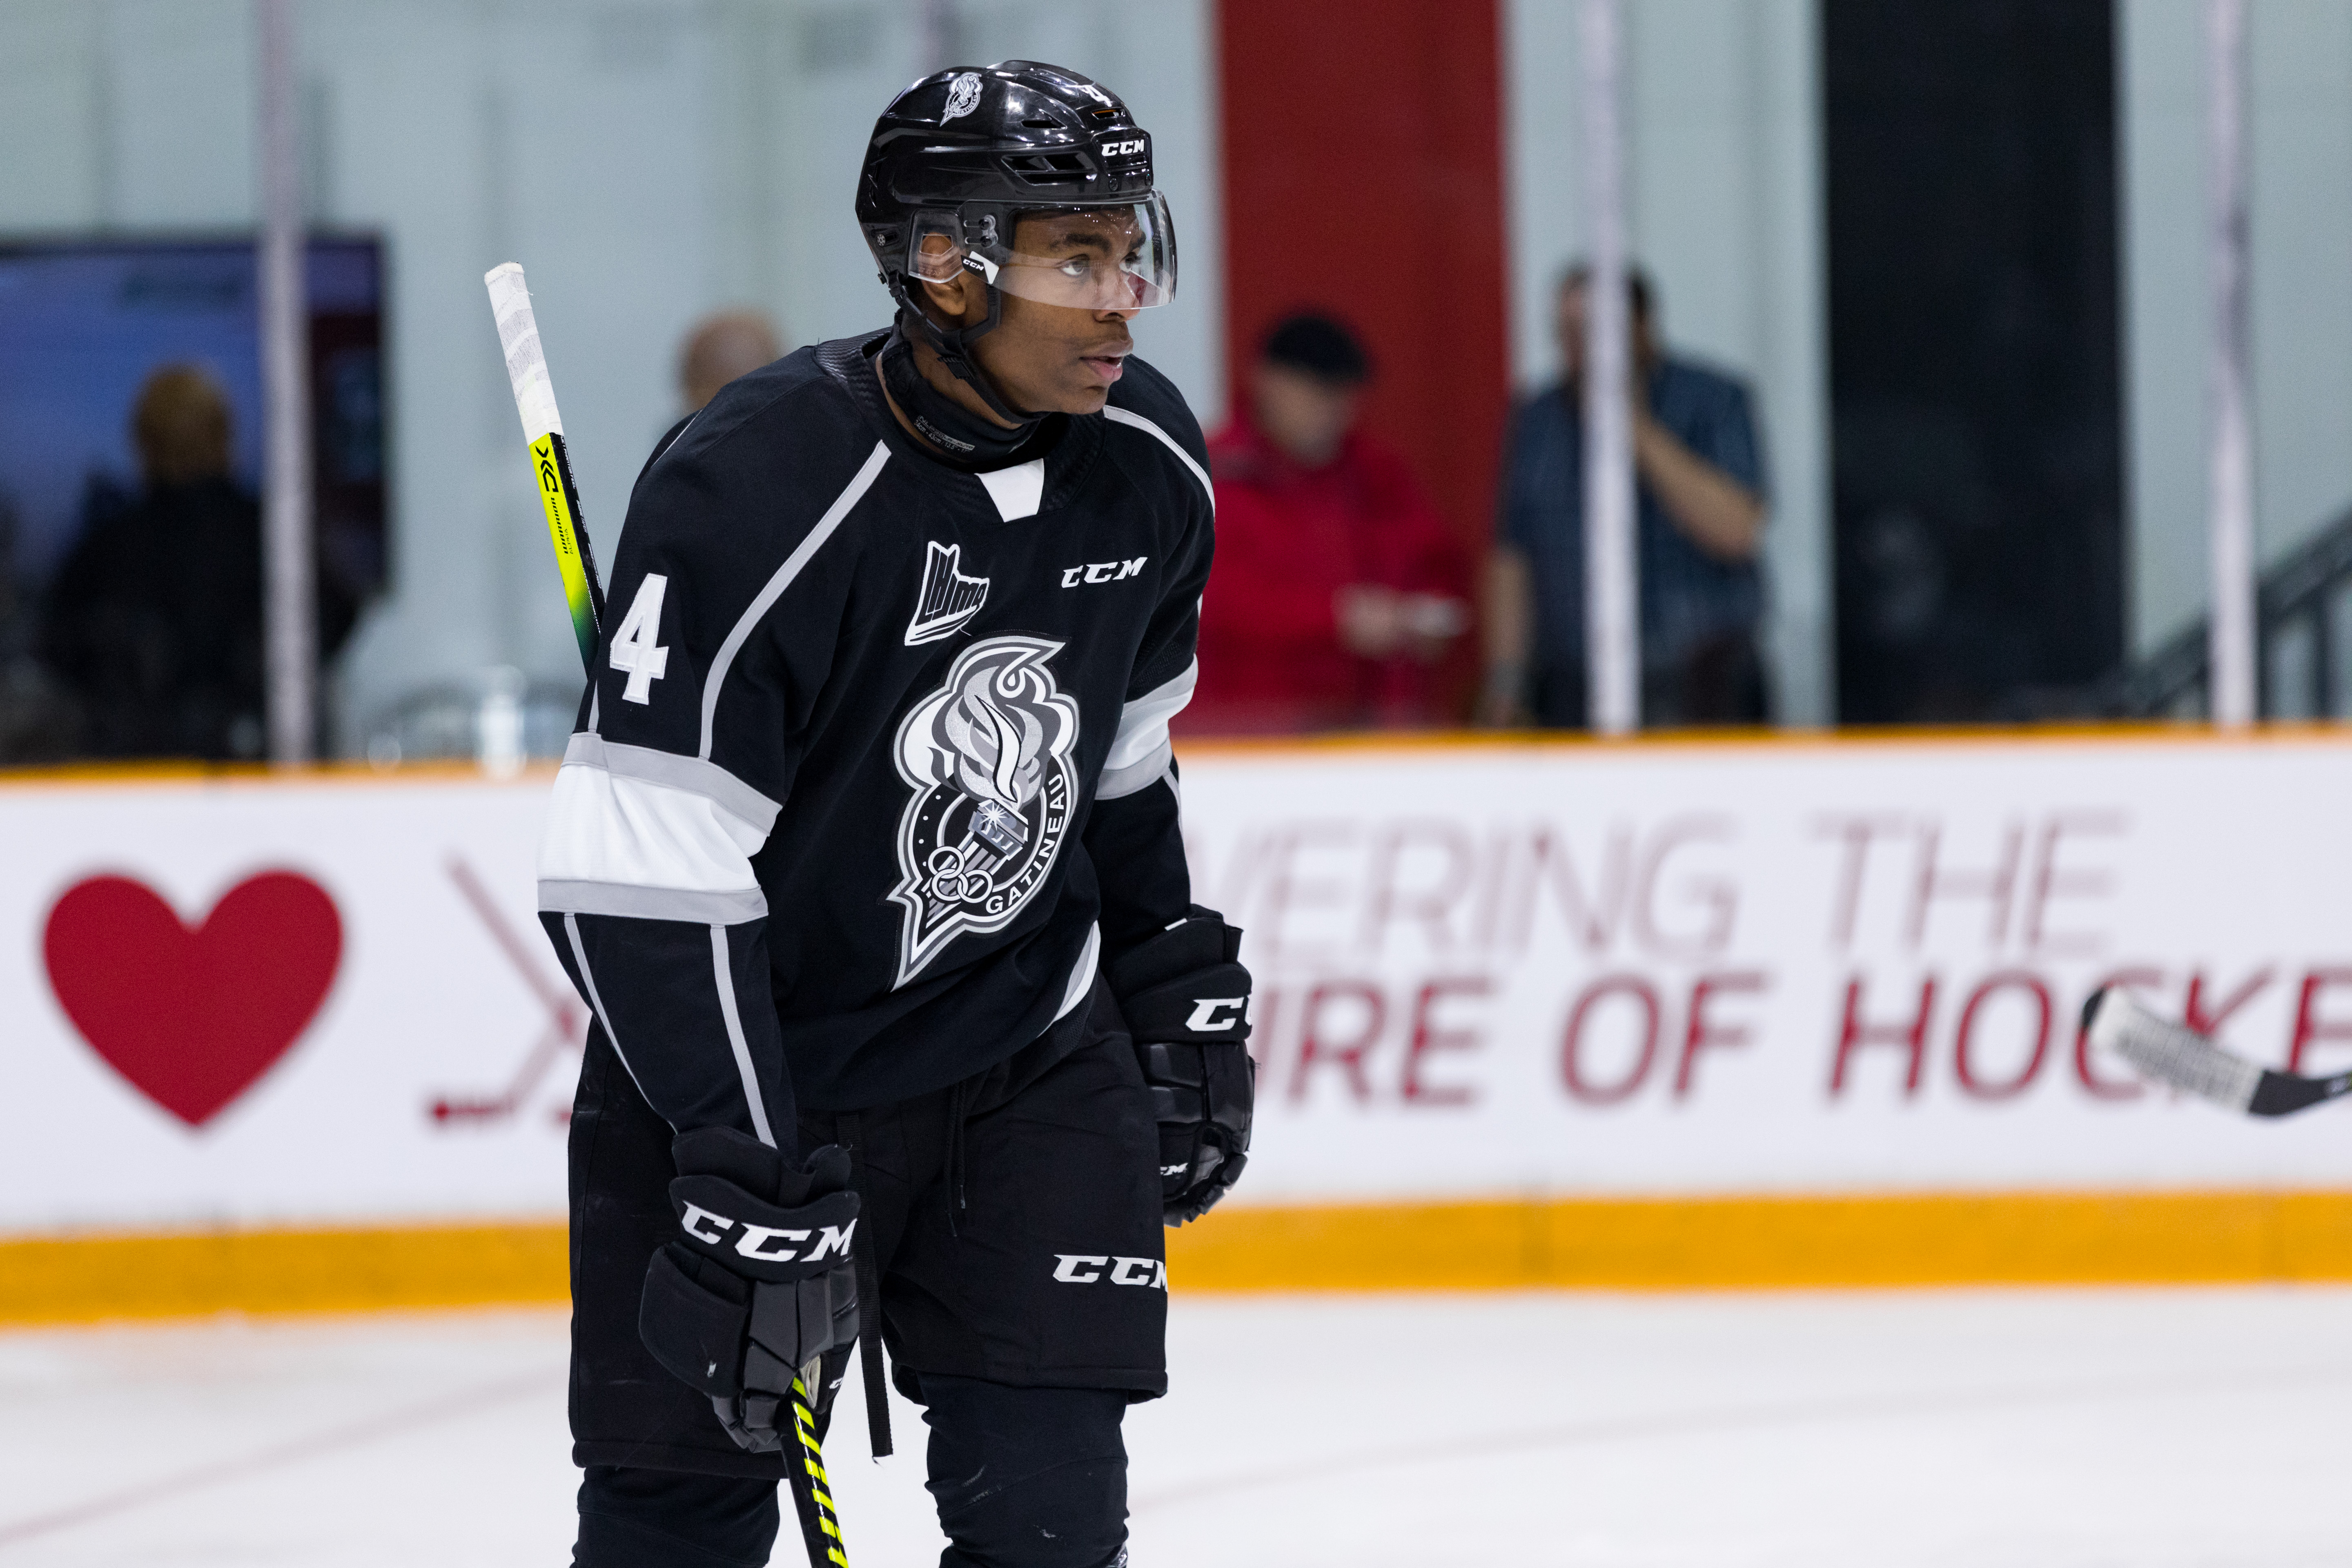 Gatineau Olympiques Defenceman Darick Louis-Jean (4) after a whistle during Ontario Hockey League action between the Gatineau Olympiques and Ottawa 67’s on December 8, 2019, at TD Place Arena in Ottawa, ON, Canada.